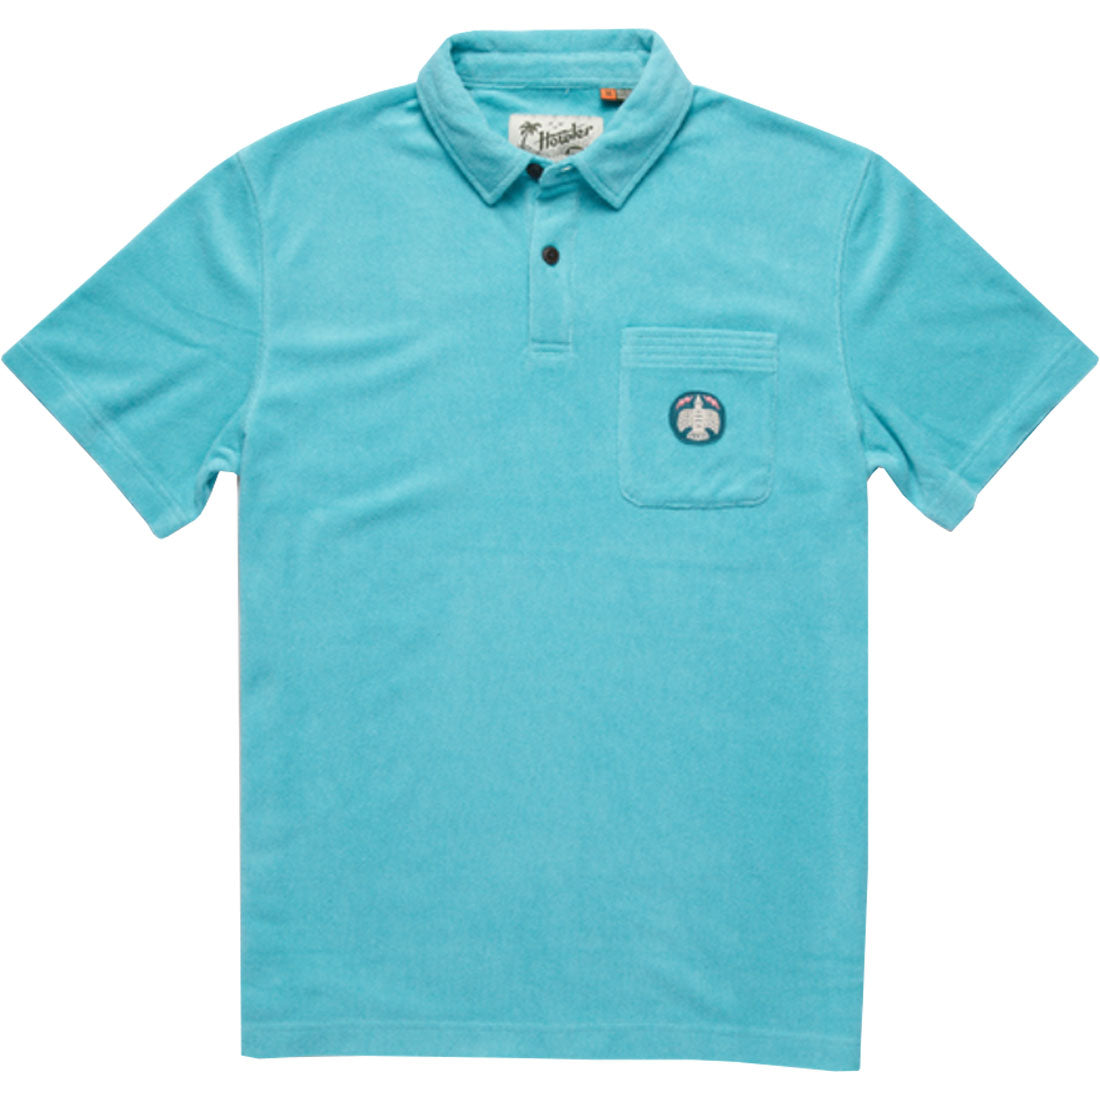 Howler Brothers Plusherman Terry Polo - Men's